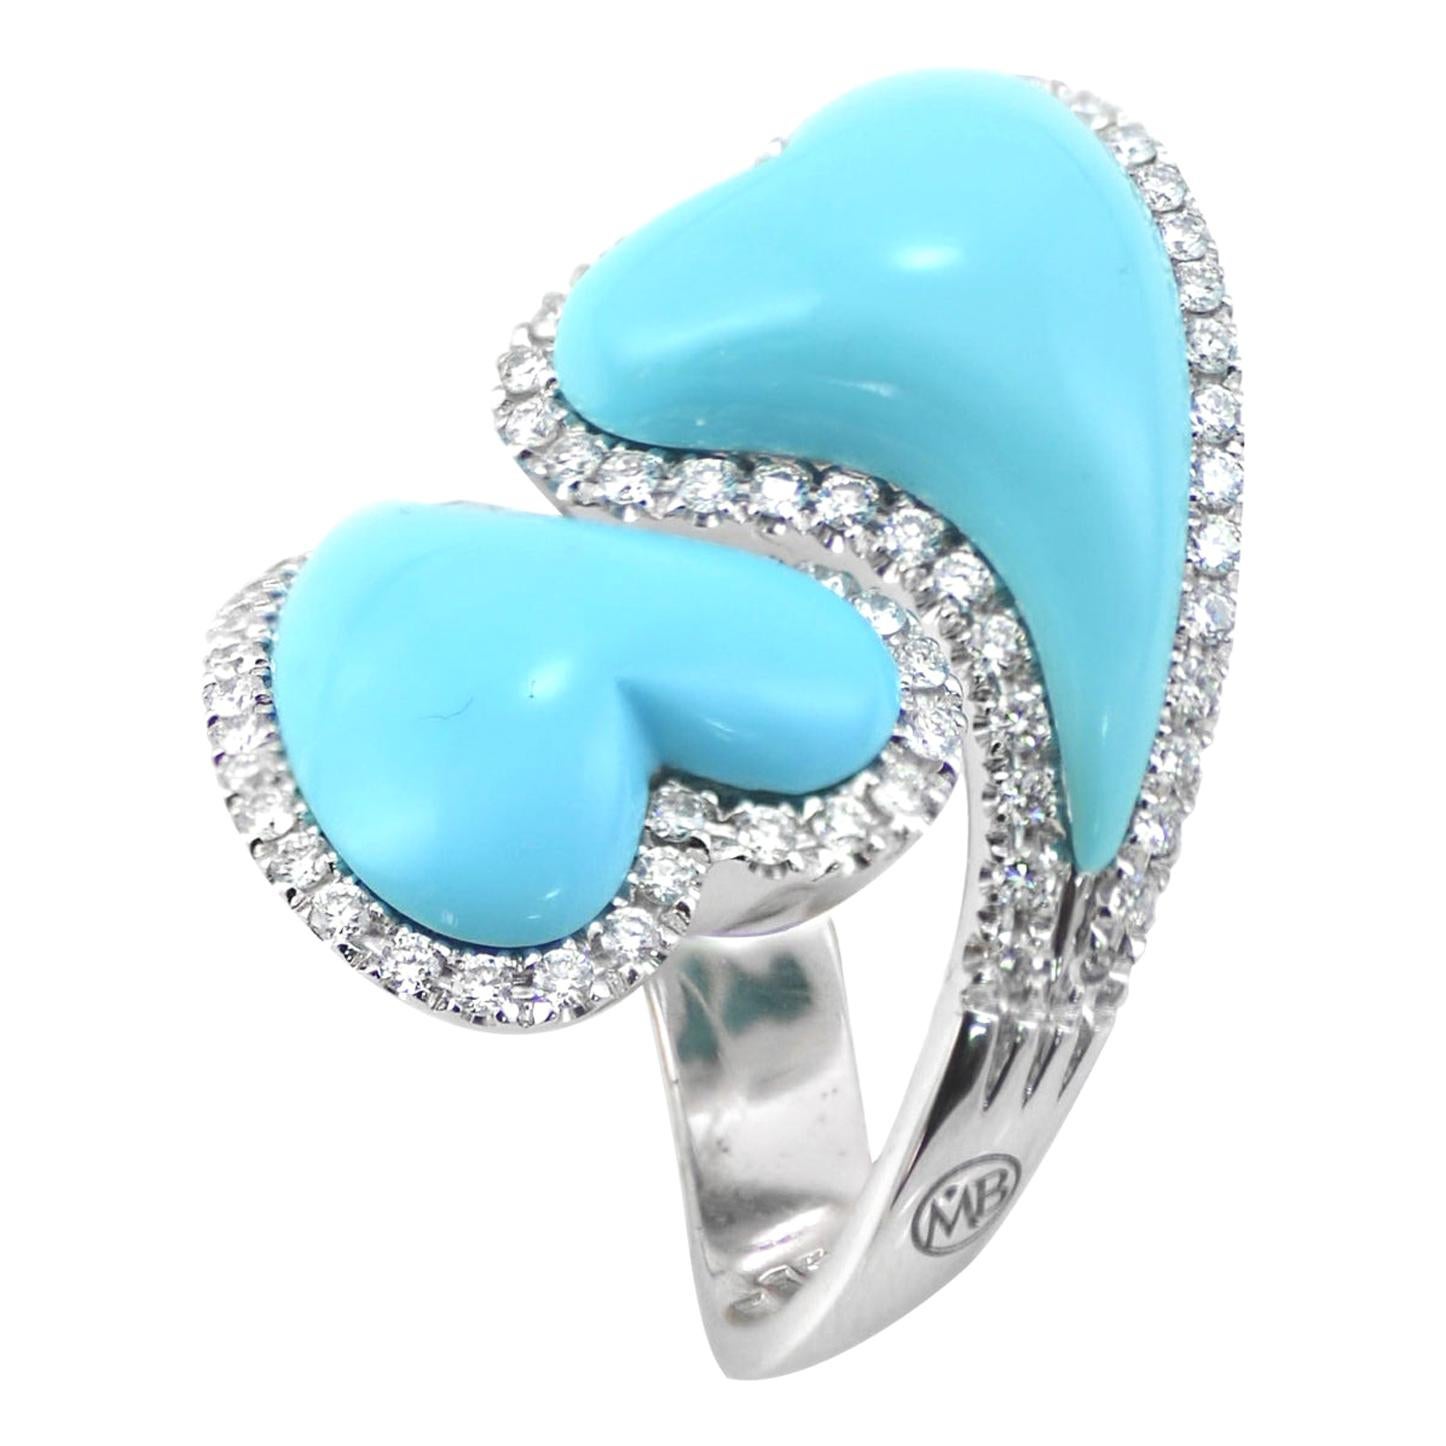 Handcrafted in Italy, in Margherita Burgener workshop, the toi et moi Hearts ring and matching pair of clip earrings is an elegant set realized in 18Kt white gold, set with diamonds to highlight  the bombé natural turquoise hearts.

Earrings
18KT